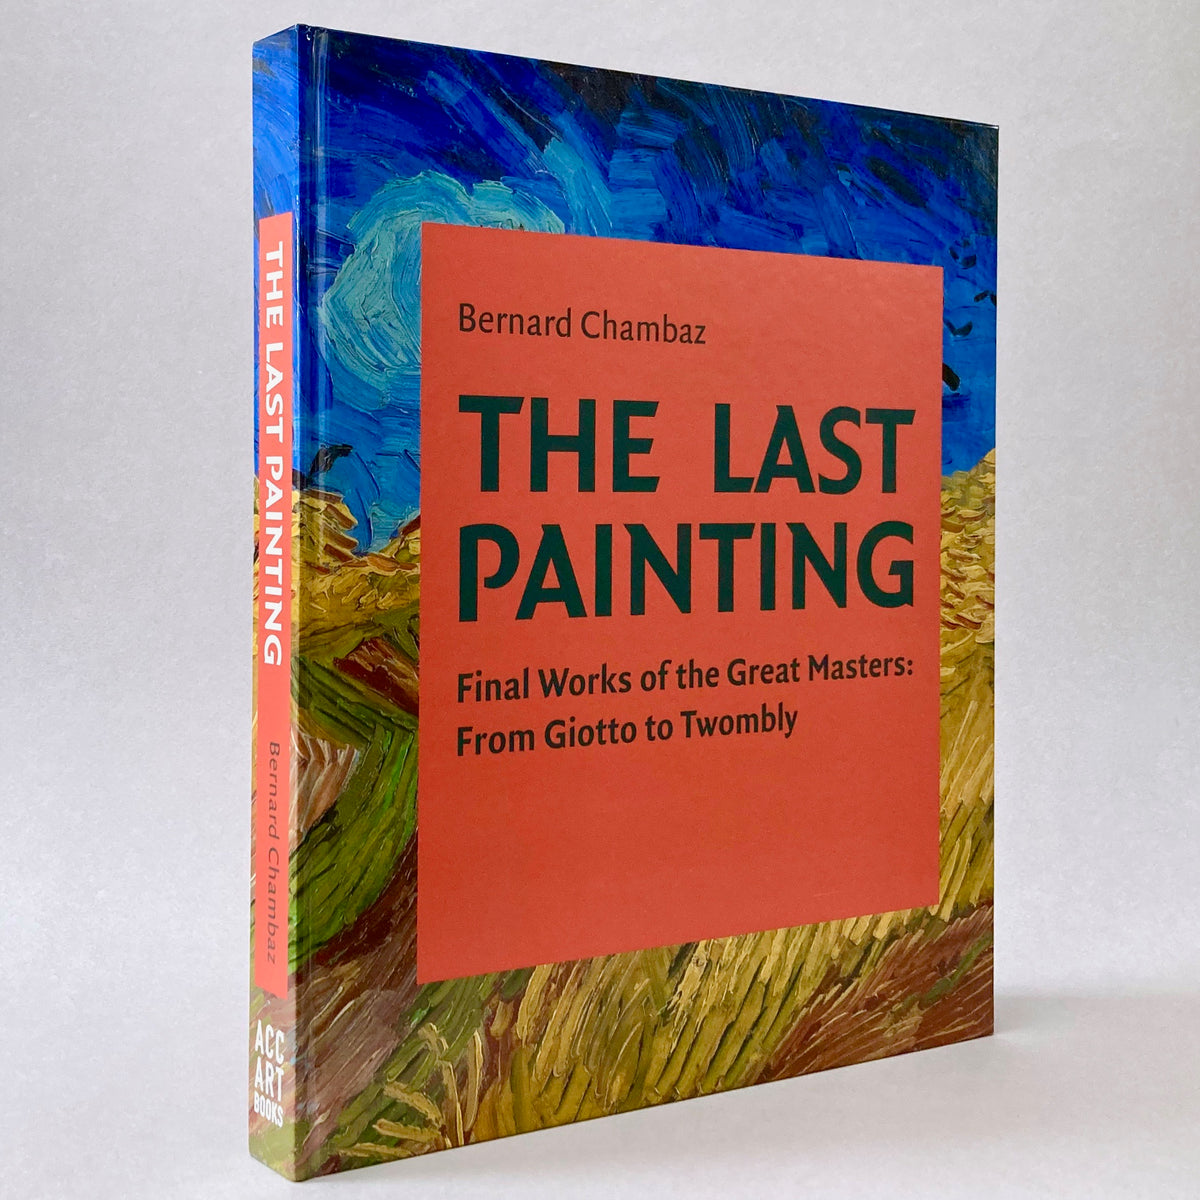 The Last Painting: Final Works of the Great Masters from Giotto to Twombly